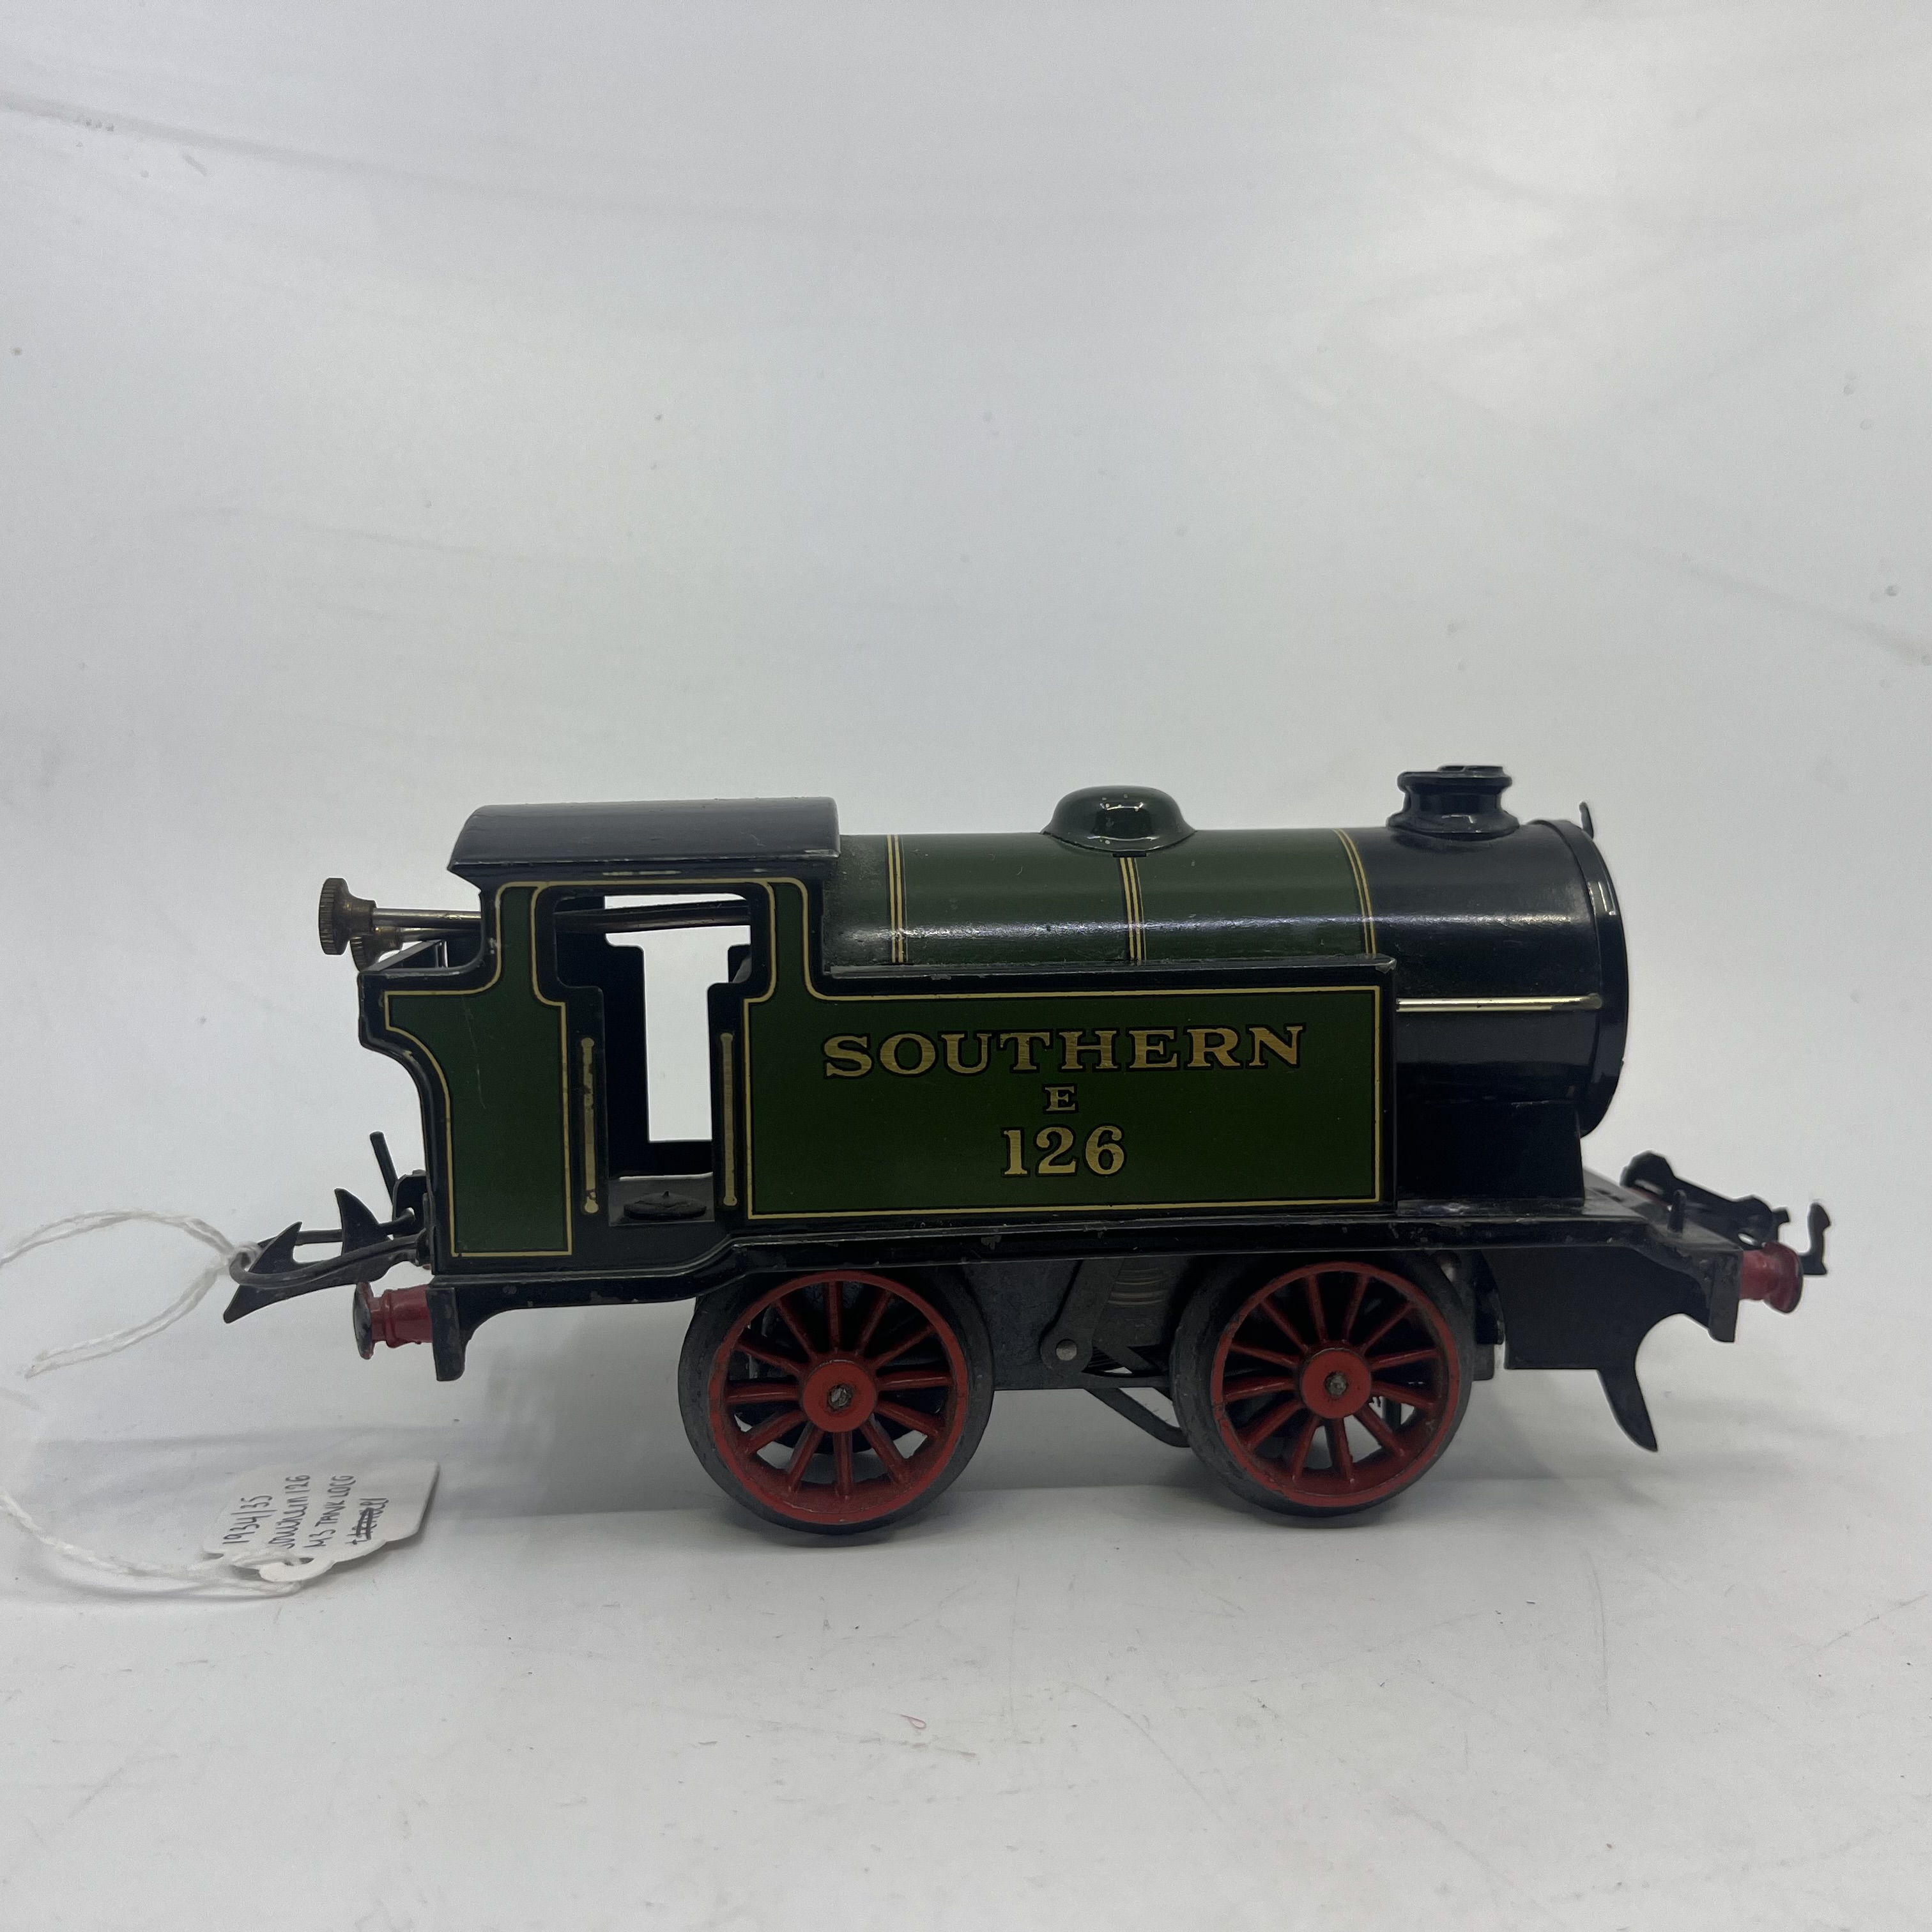 Hornby O Gauge antique railway interest: from a significant, private collection collected from - Image 4 of 4